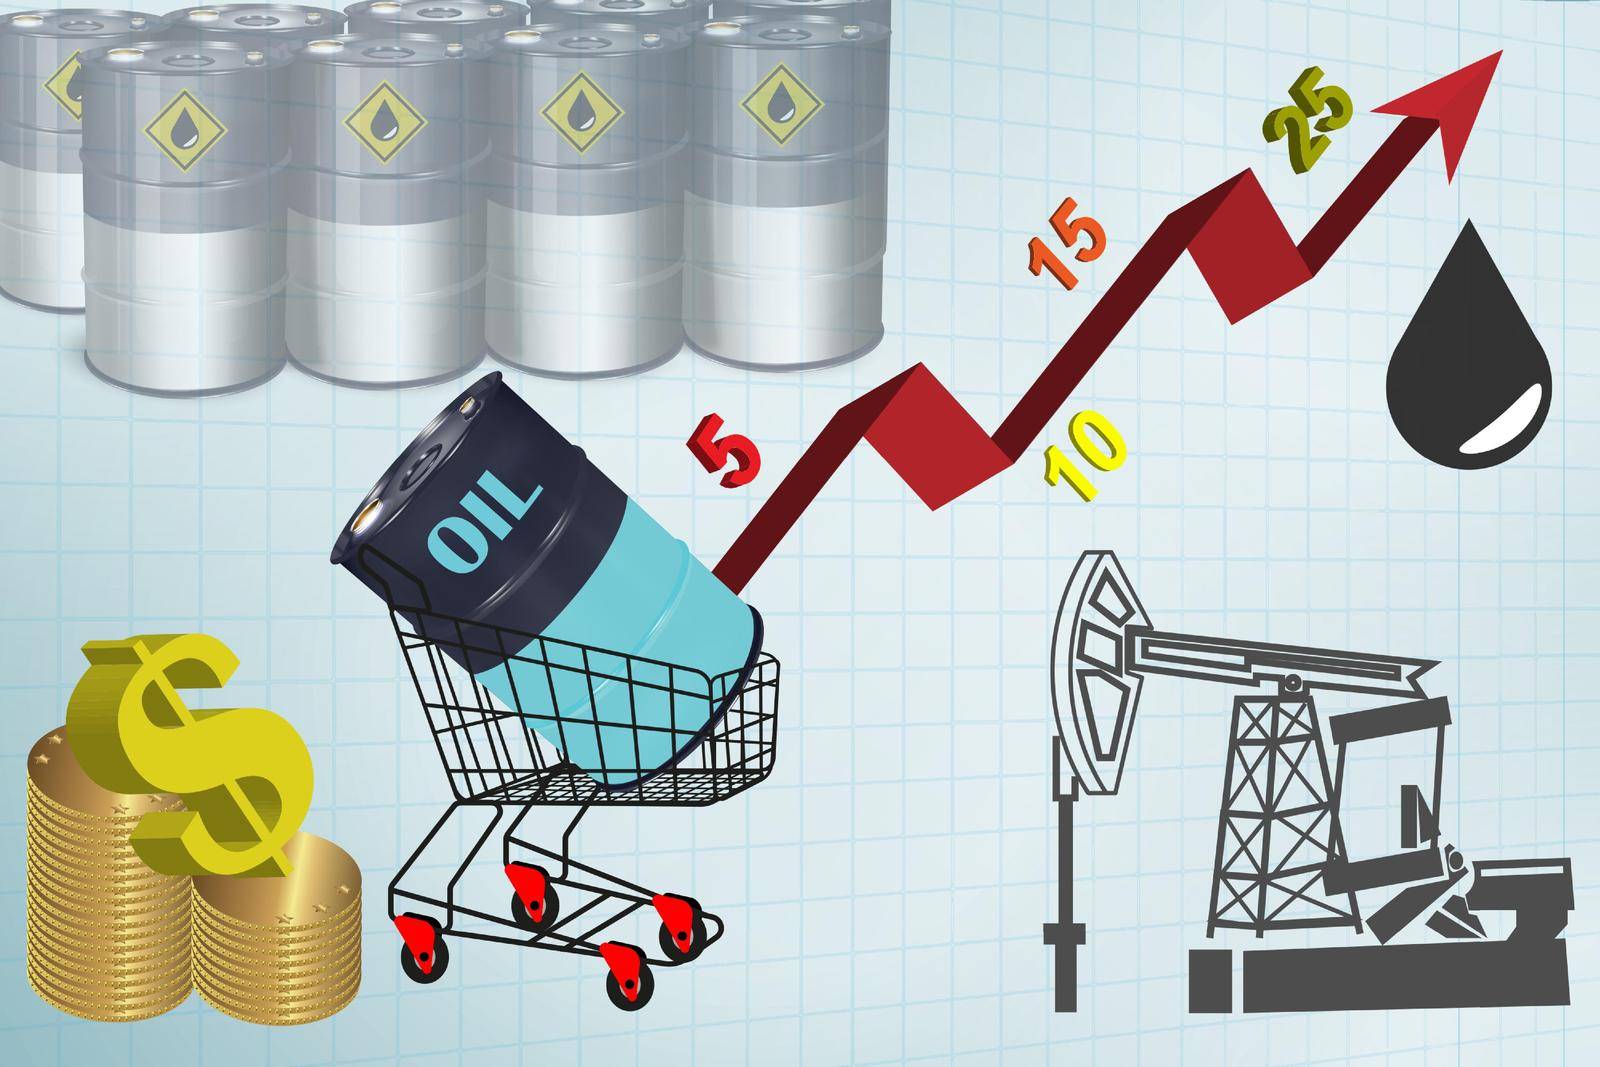 Oil barrel graph with red arrow pointing up. Vector illustration. by Samodelkin20